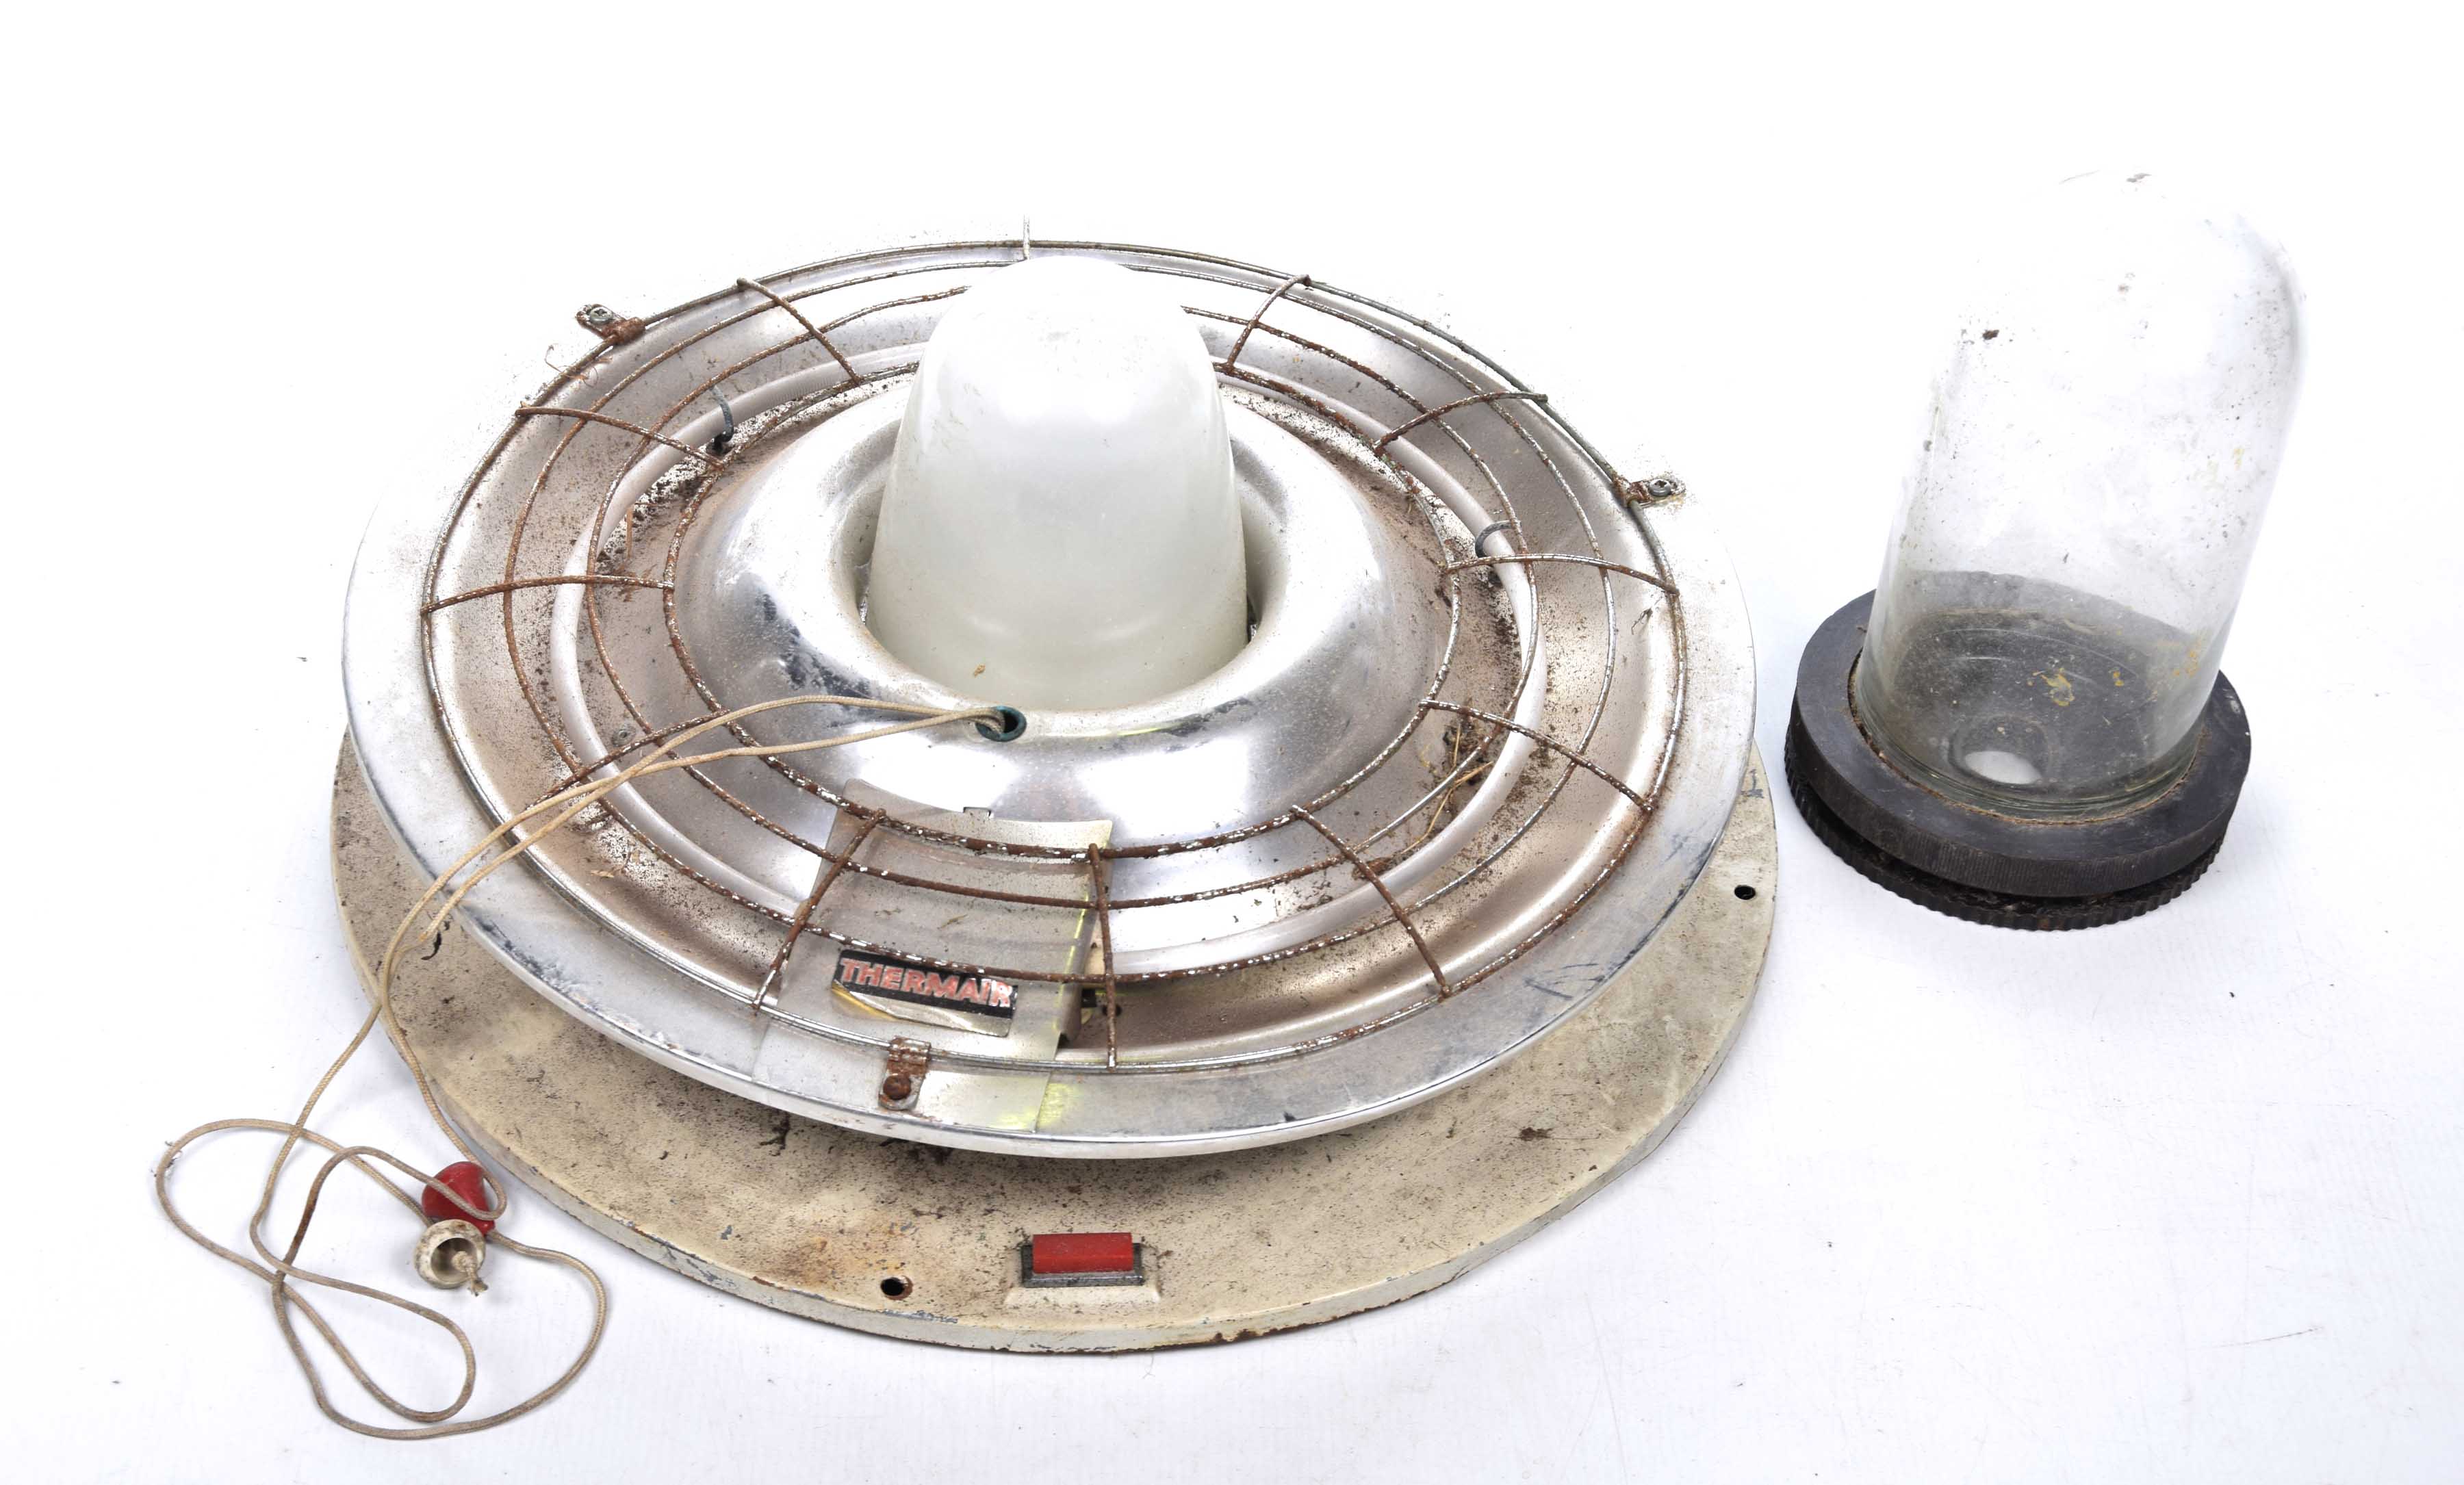 A vintage industrial bulkhead style ceiling light The metal chromed light with exterior cage and